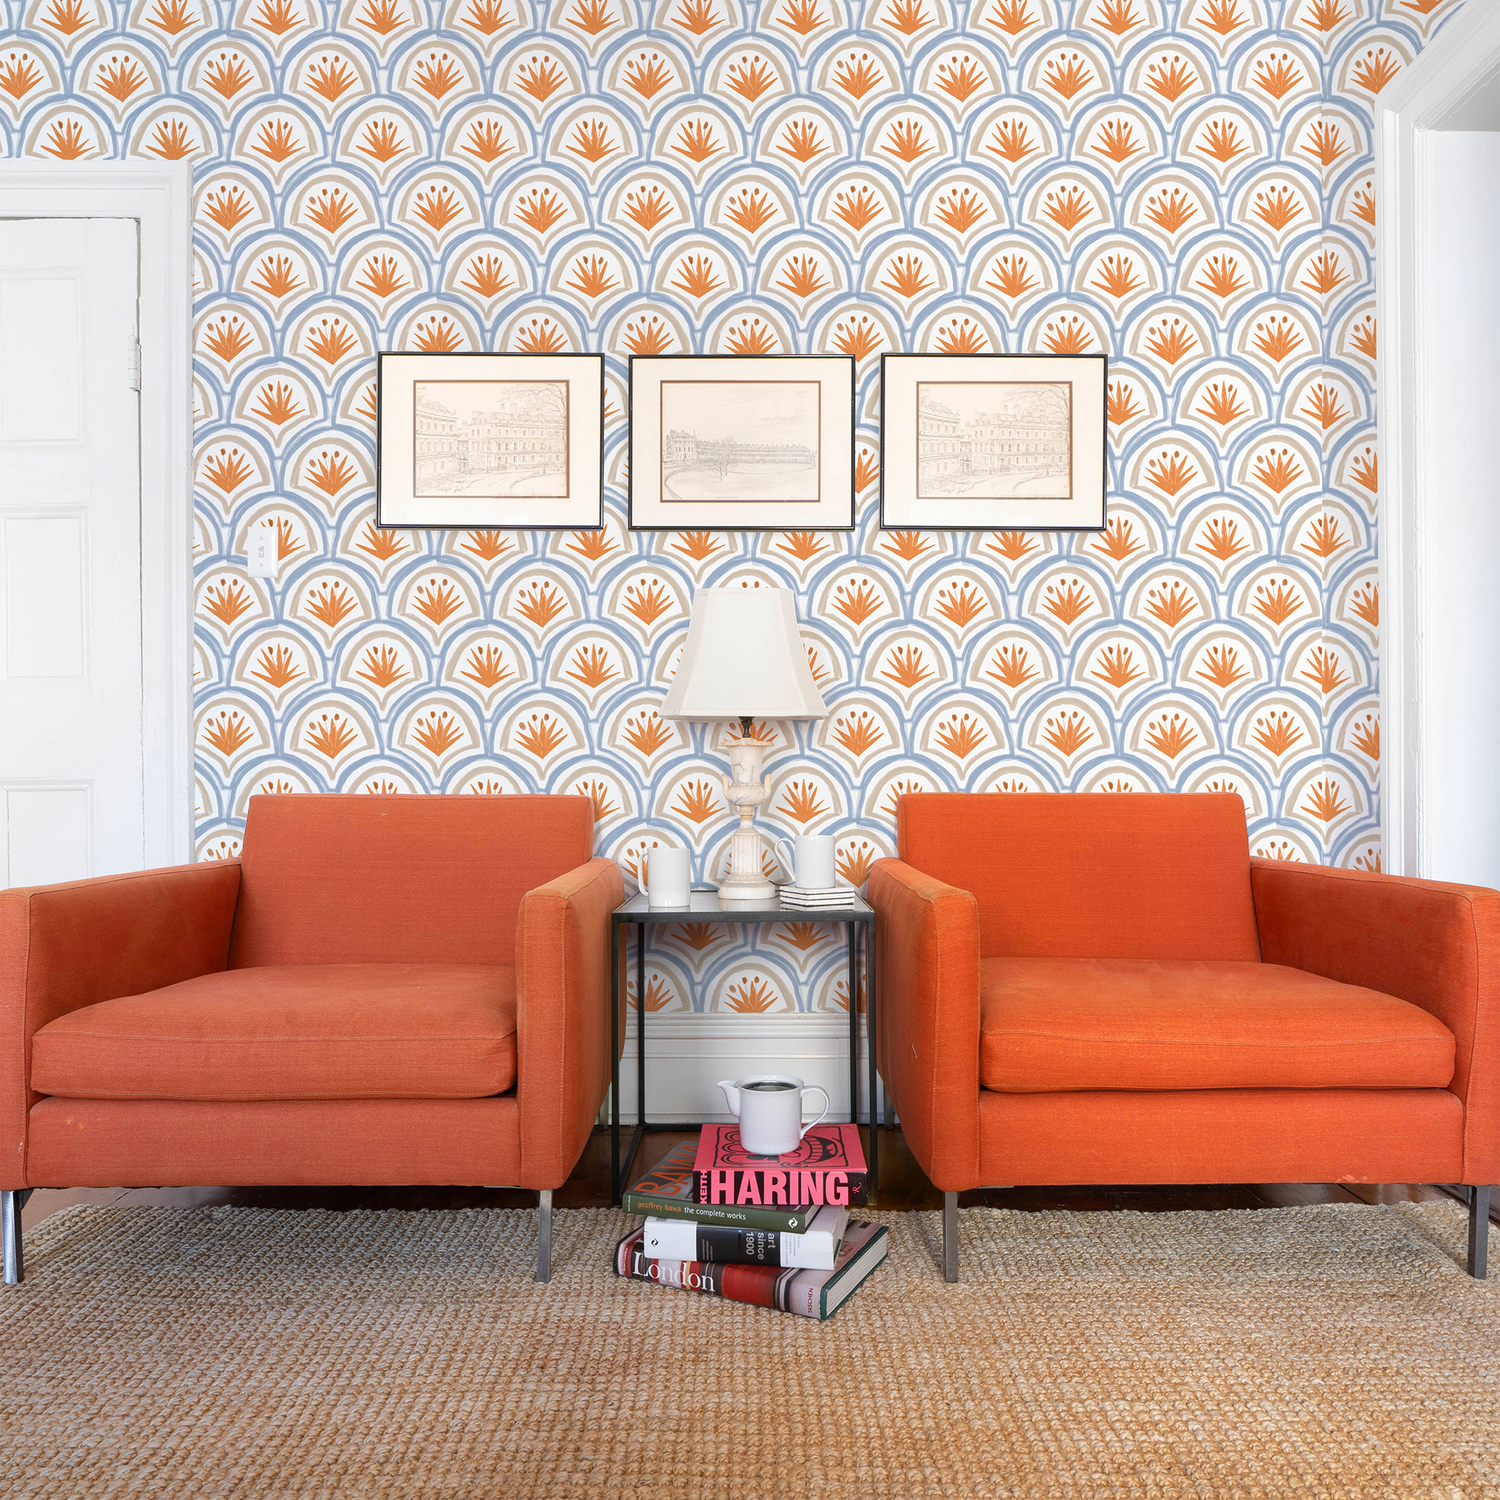 Living room styled with Art Deco Palm Pattern Printed Wallpaper and two orange sofa chairs with a white lamp on table and books stacked on floor in between them